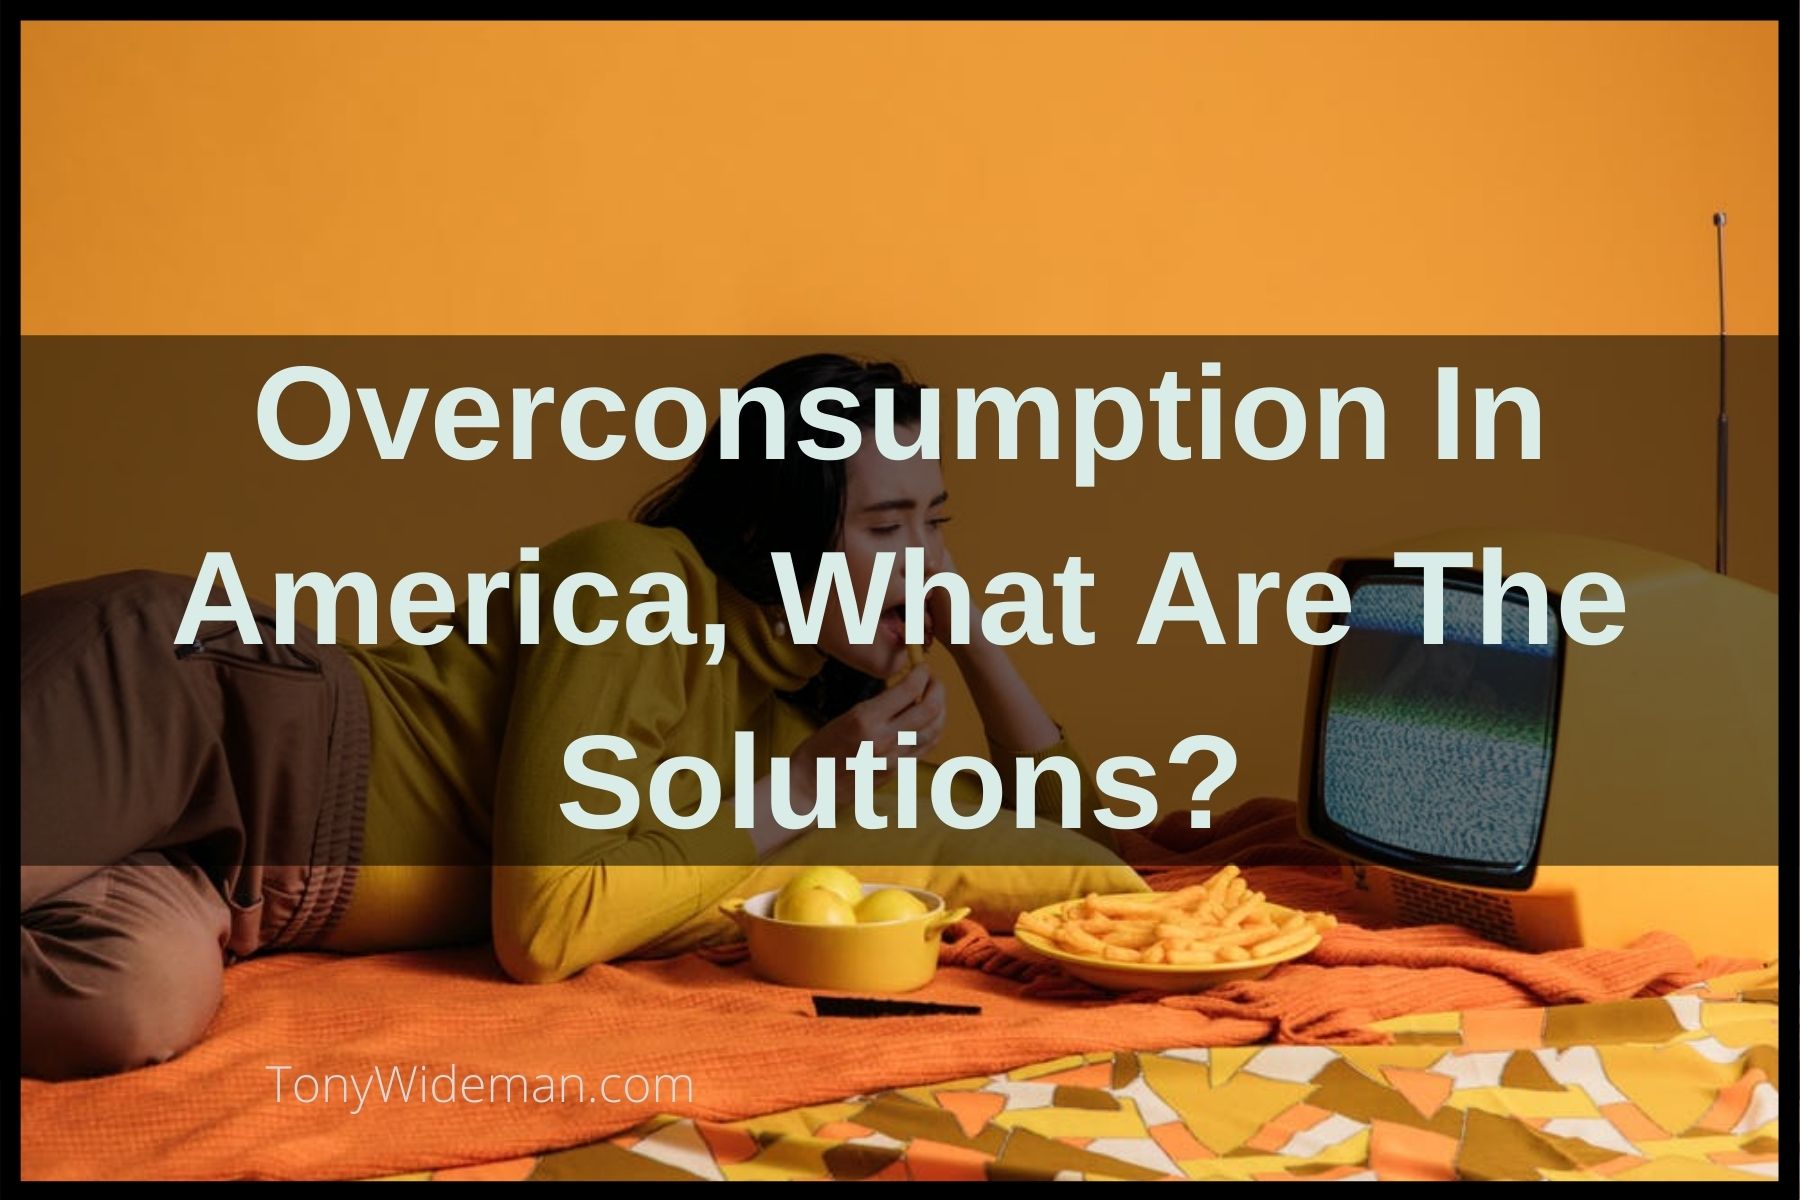 Overconsumption In America, What Are The Solutions?